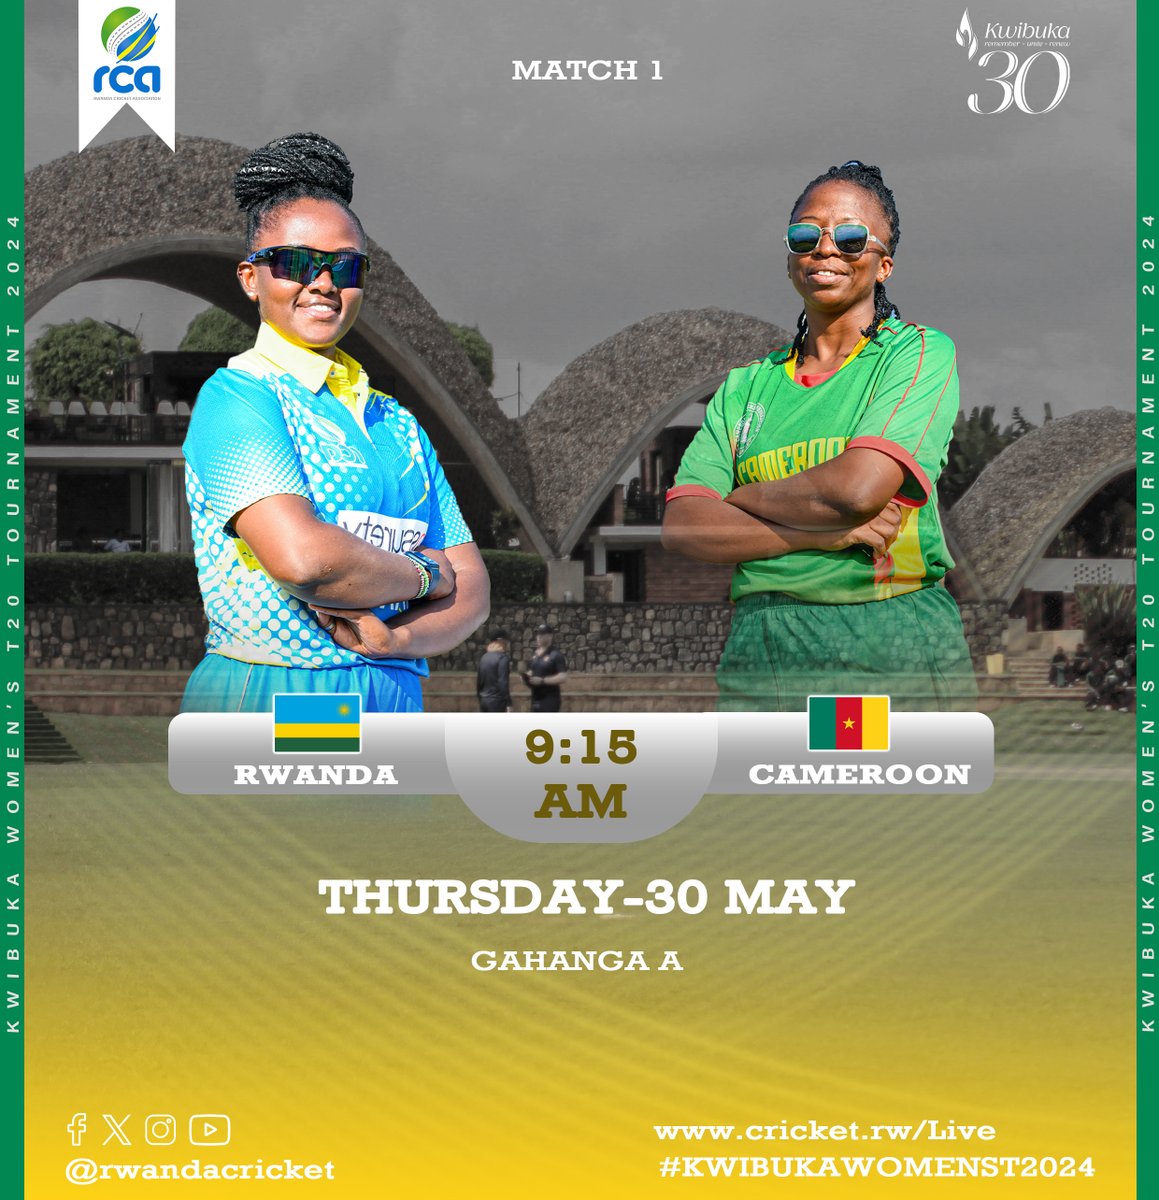 🏏 Kwibuka Cricket 2024 - Opening Game 🏏

Today's Game:
🇷🇼 Rwanda Women vs. 🇨🇲 Cameroon Women
🕘 9:15 AM
Rwanda will be playing at home in front of their fans! Catch the live action at cricket.rw/live.

#KwibukaCricket2024 #OpeningGame #RwandaVsCameroon #LiveCricket